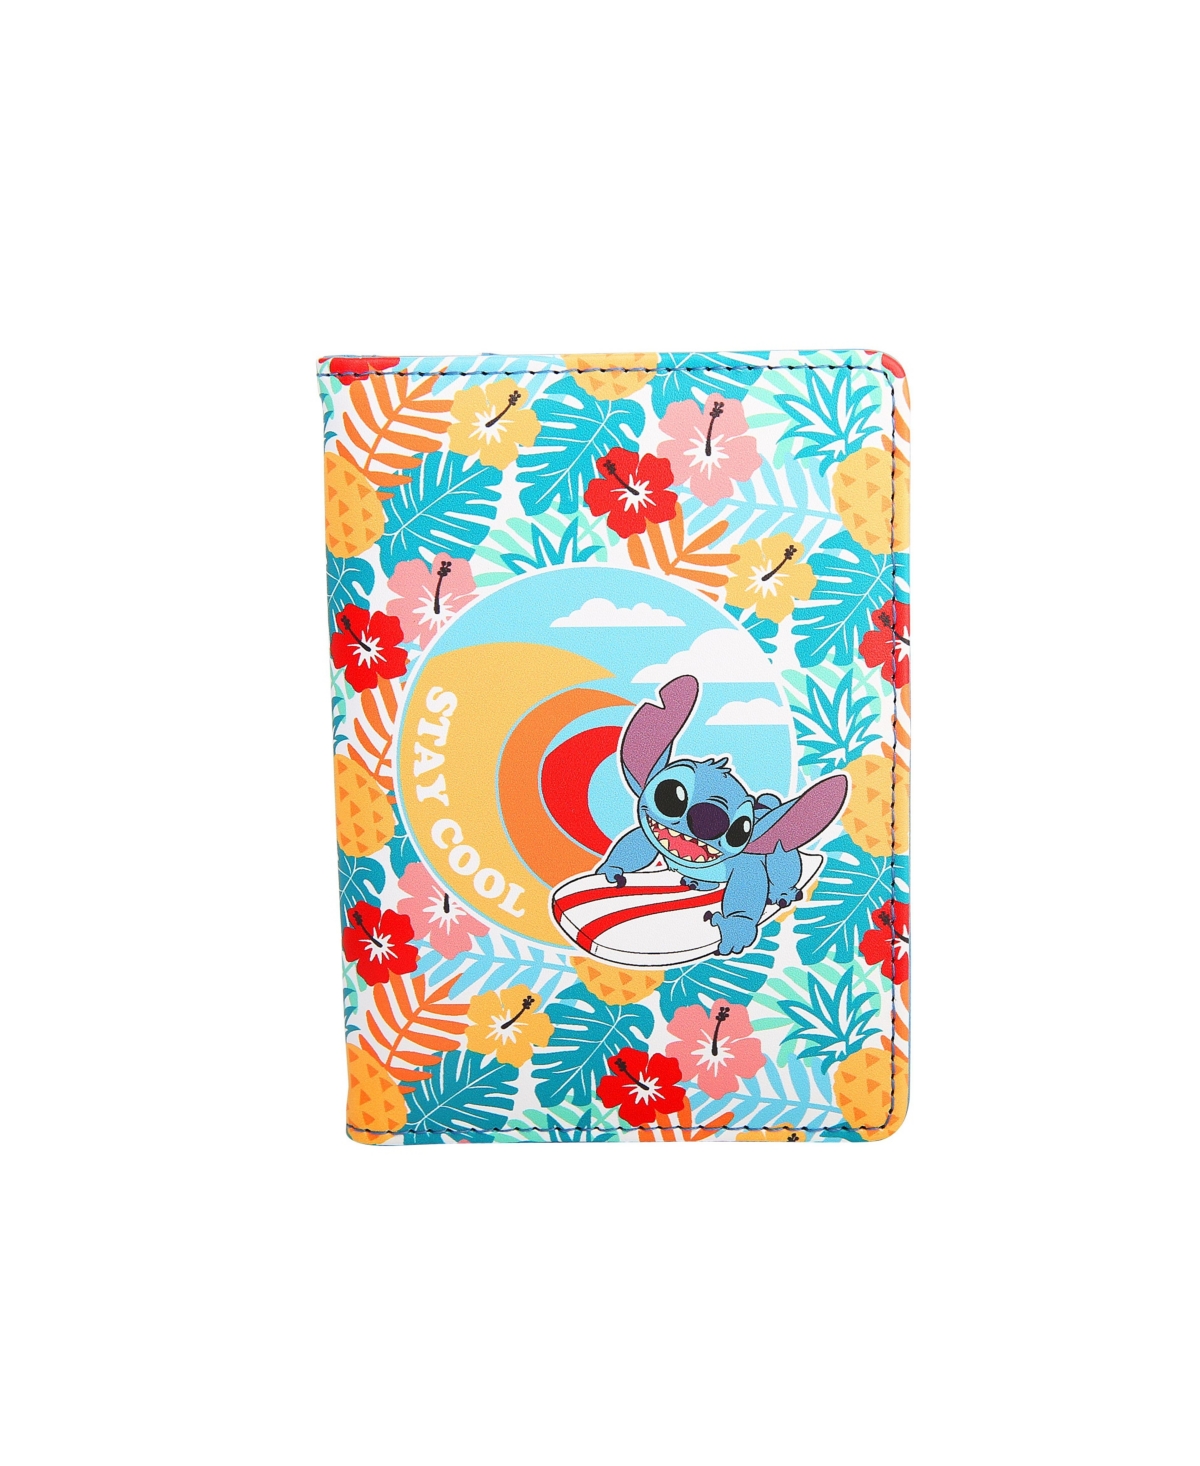 Lilo and Stitch Passport Holder- Cute Travel Wallet for Disney Fans, Officially Licensed - Blue, yellow